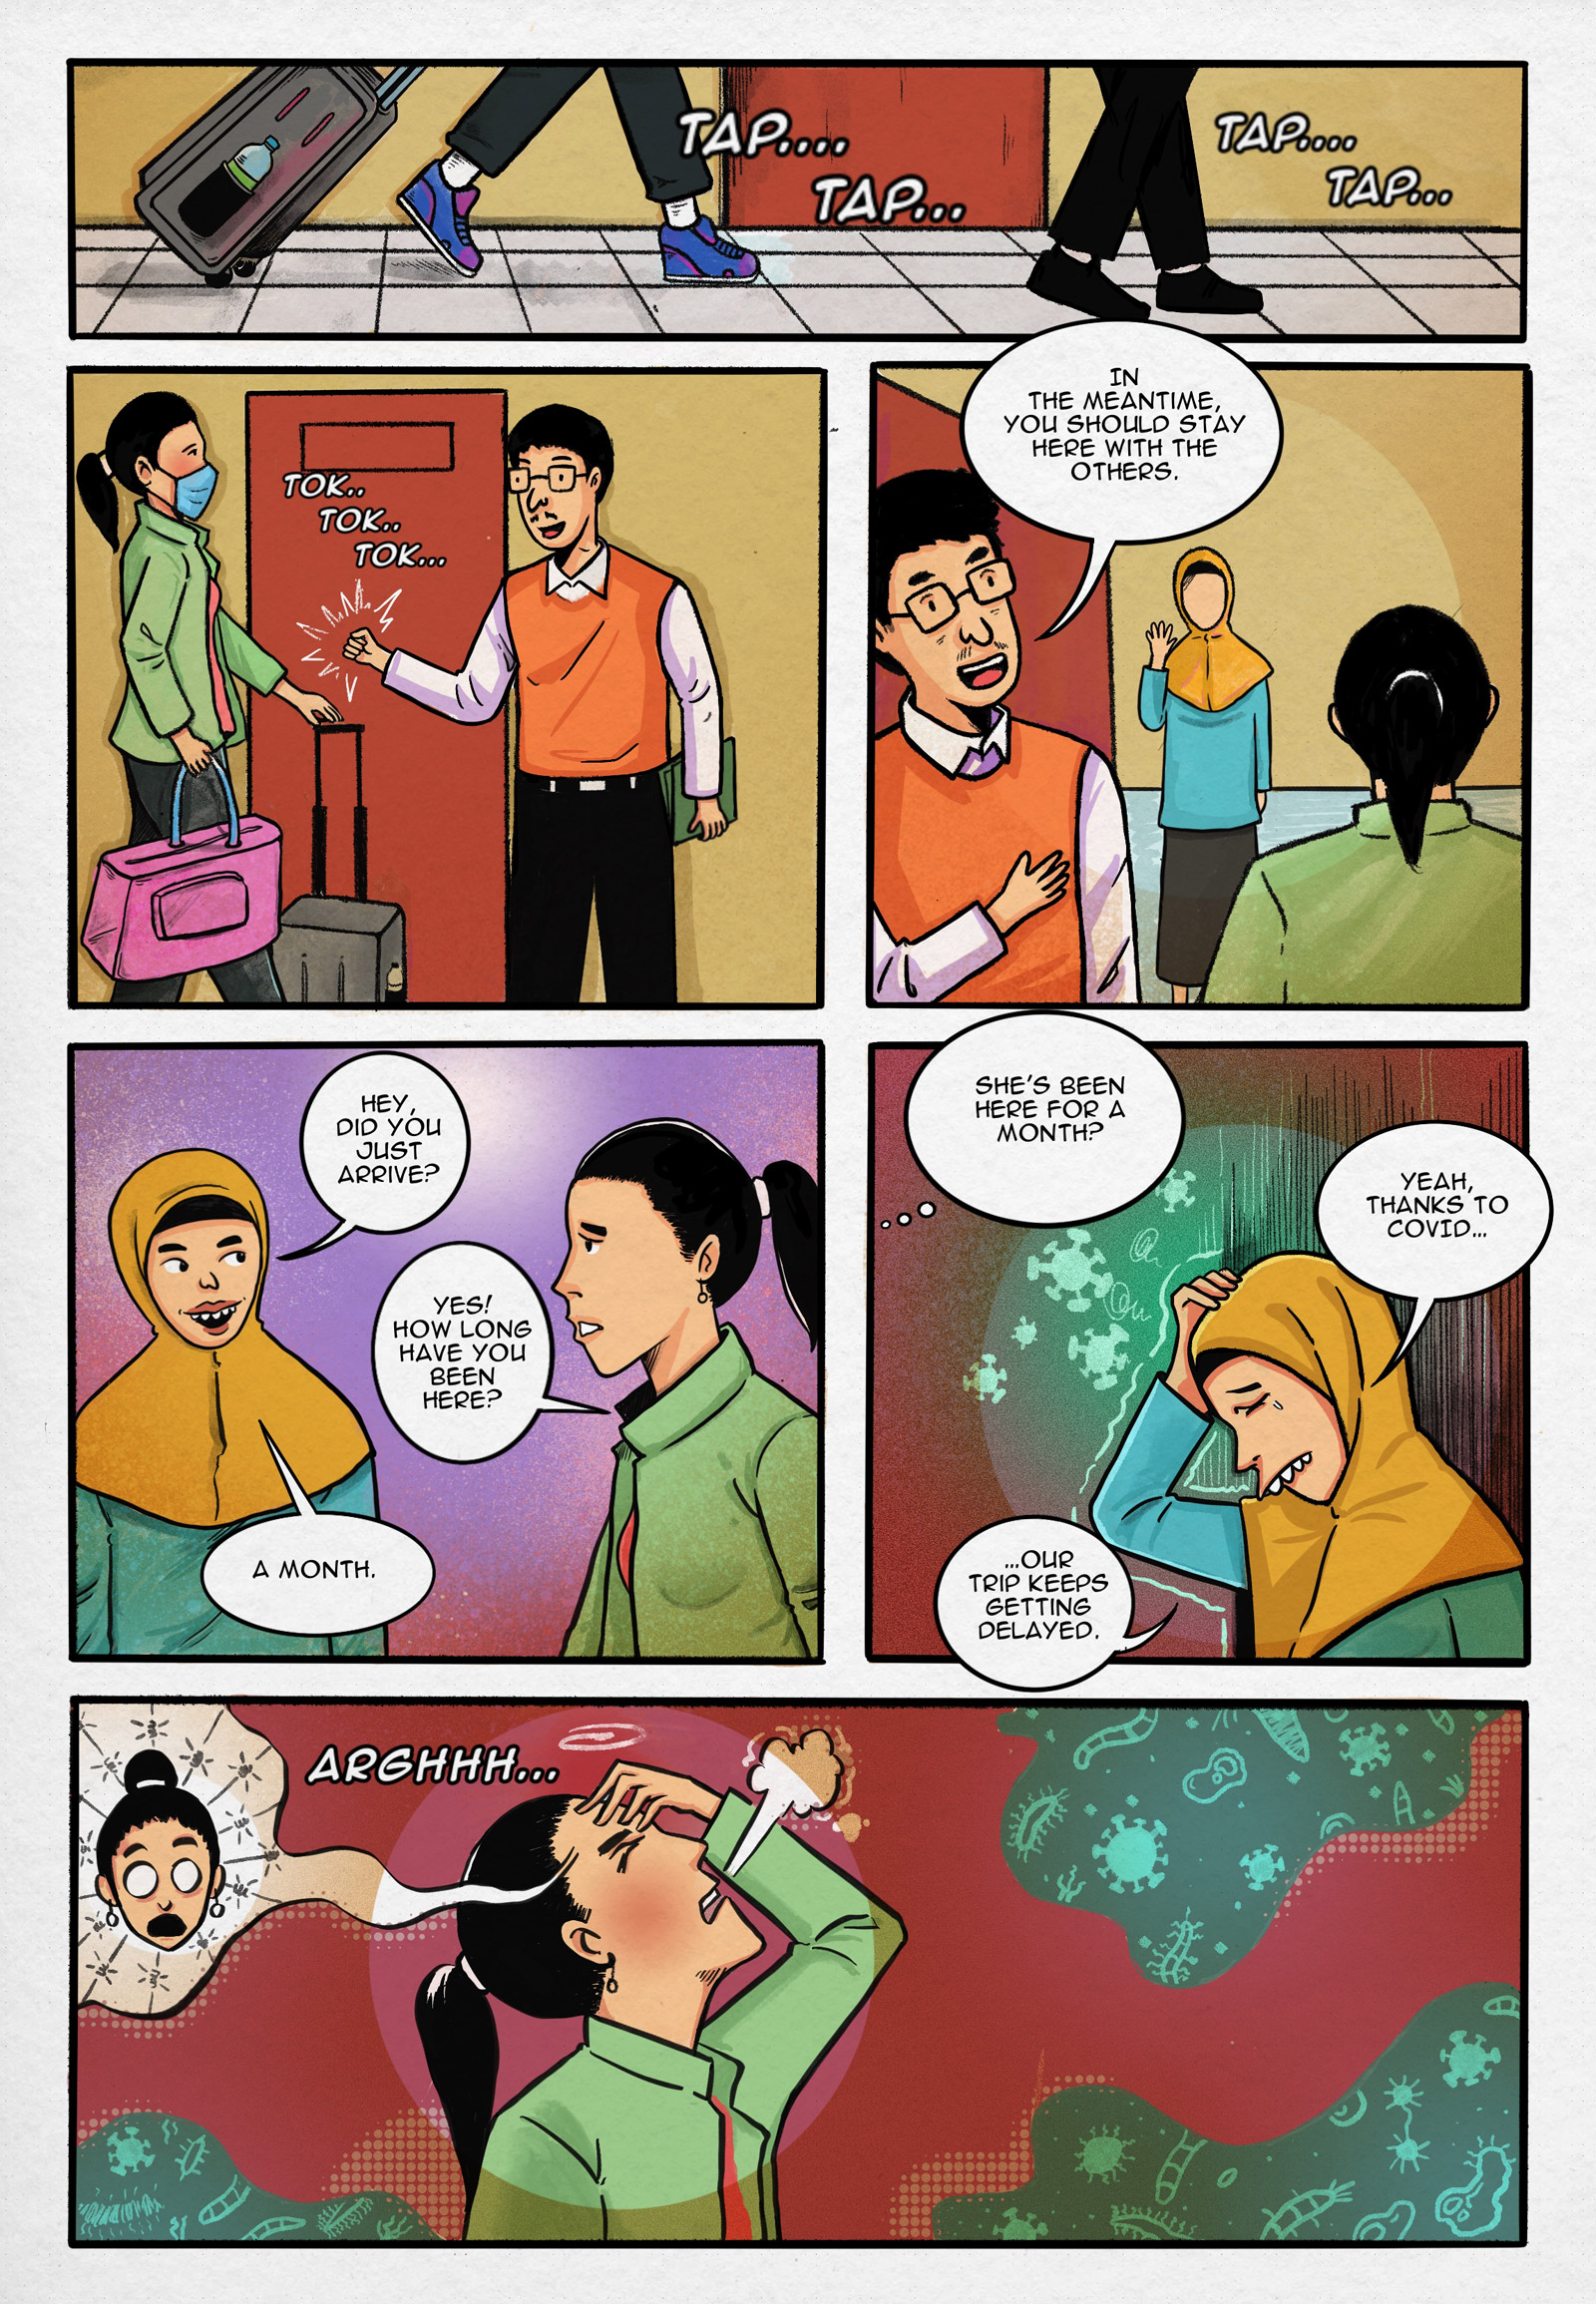 Page 2.
Panel 1. Suryati arrives at the training centre for domestic workers, accompanied by an agent.

Panel 2. Suryati and the agent knock on the door together.

Panel 3. Suryati is welcomed by other candidates. Agent: “In the meantime, you should stay here with the others.”

Panel 4. Suryati converses with her fellow domestic worker candidate who has stayed there longer. Fellow Candidate: “Hey, did you just arrive?” Suryati: Yes! How long have you been here?” Fellow Candidate: “A month.”

Panel 5. Suryati is thinking to herself. “She’s been here for a month?” Fellow Candidate: “Yeah, thanks to COVID… our trip keeps getting delayed.”

Panel 6. Suryati’s emotional outburst while thinking about the delay.
